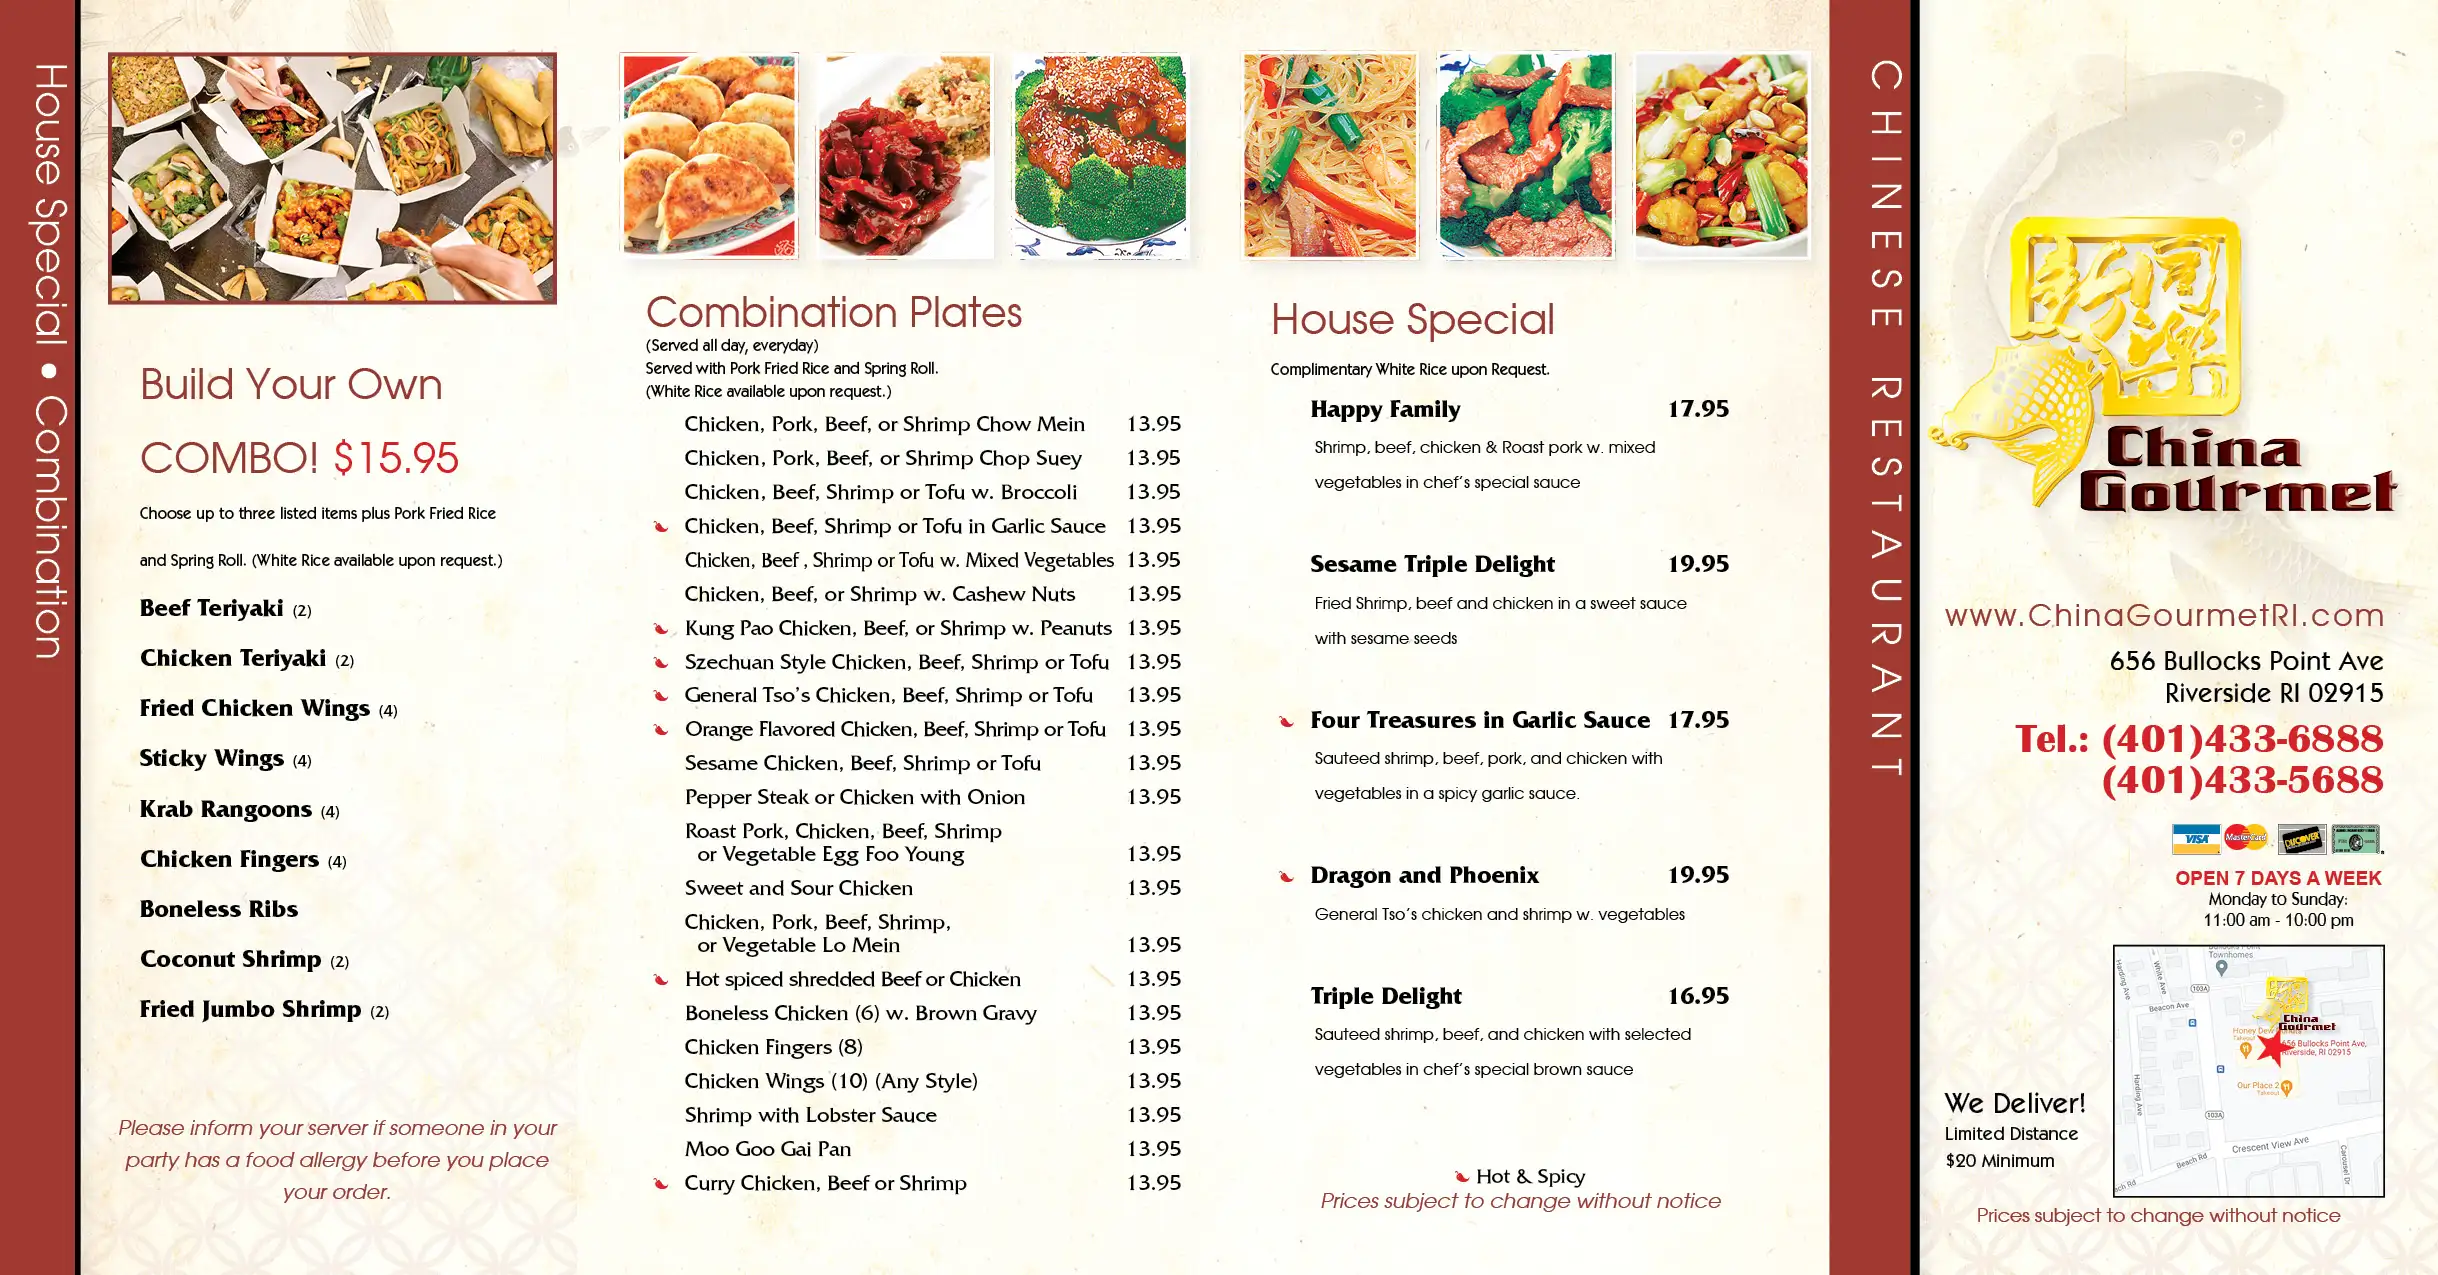 Chinese food menu | House special combination plates